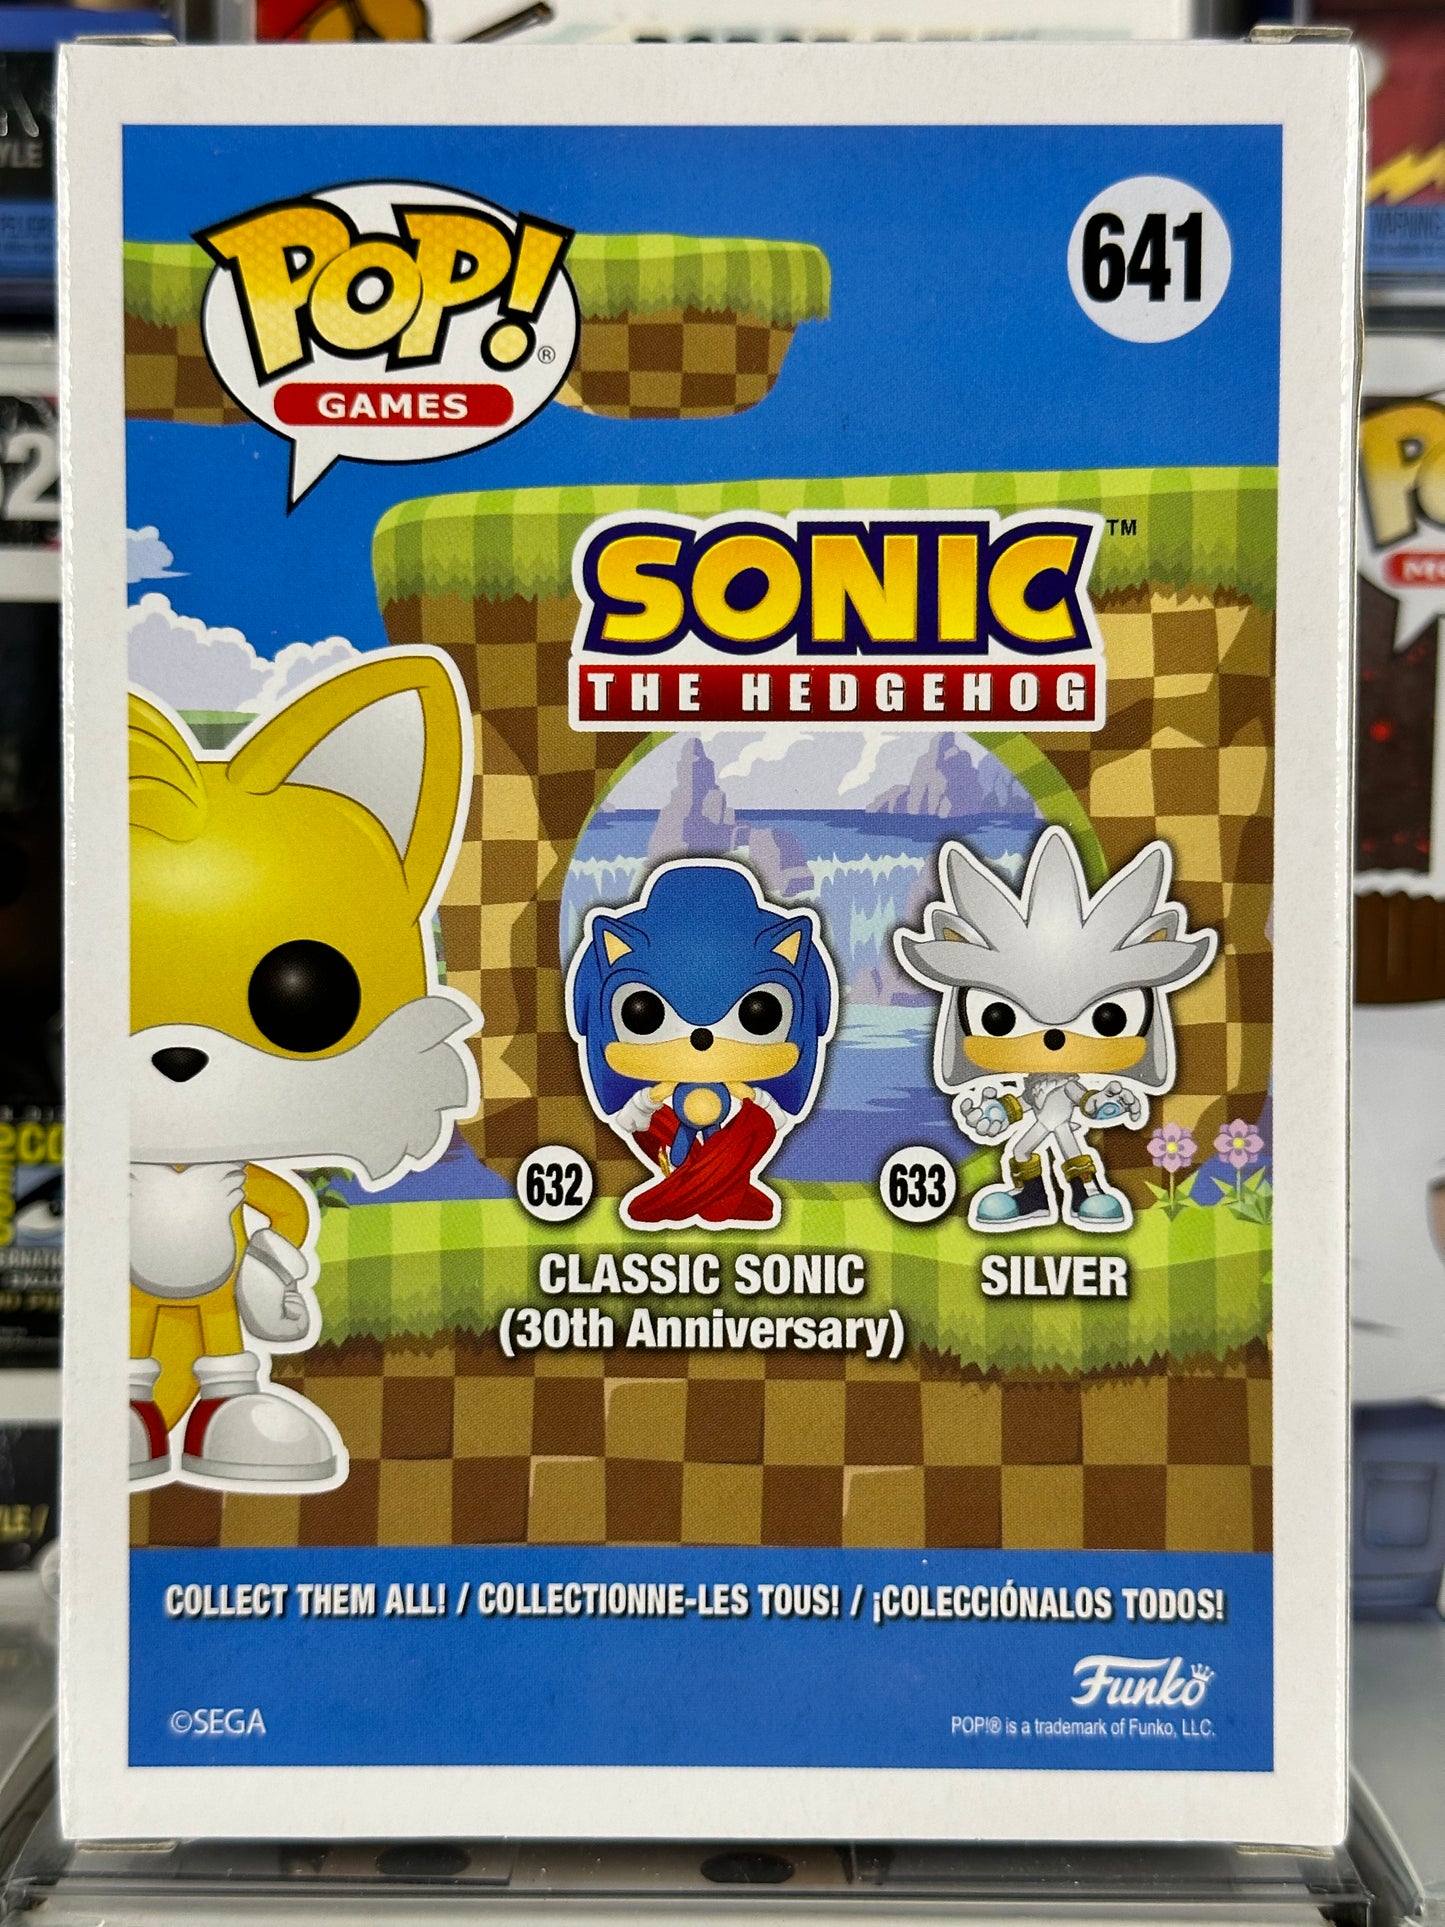 Sonic the Hedgehog - Tails (Flocked) (641) Vaulted Target Con Exclusive